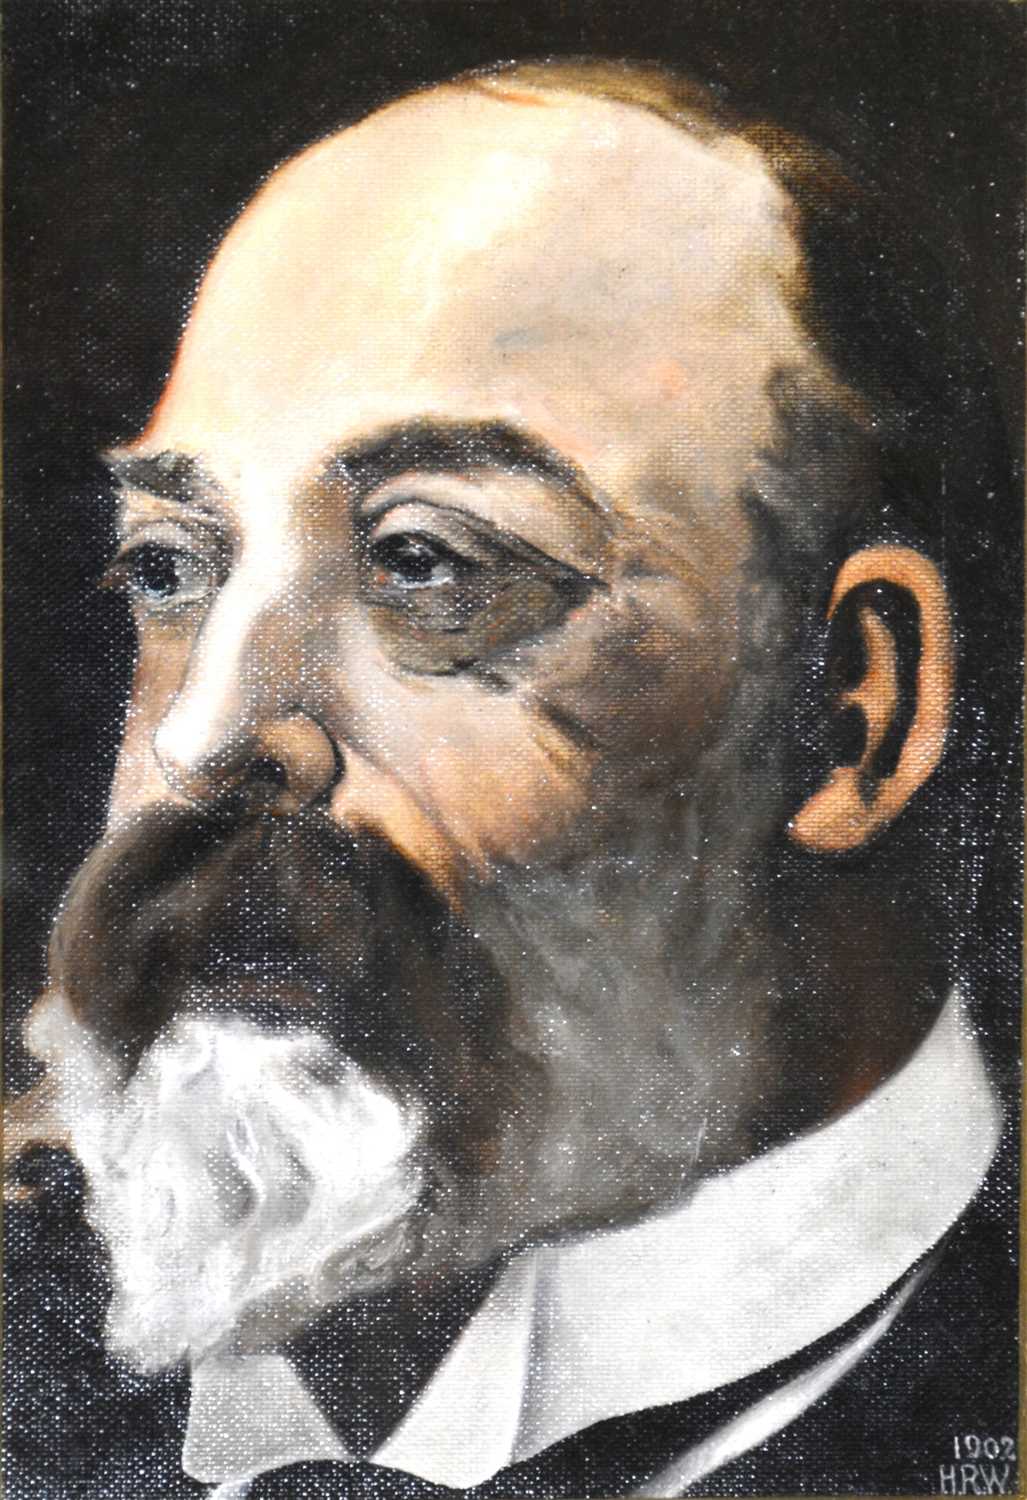 Lot 308 - H.R.W., portrait of King Edward VII, dated 1902, initials and date on bottom right-hand-side, oil on textured board, 23.8cm x 16.3cm visible size.